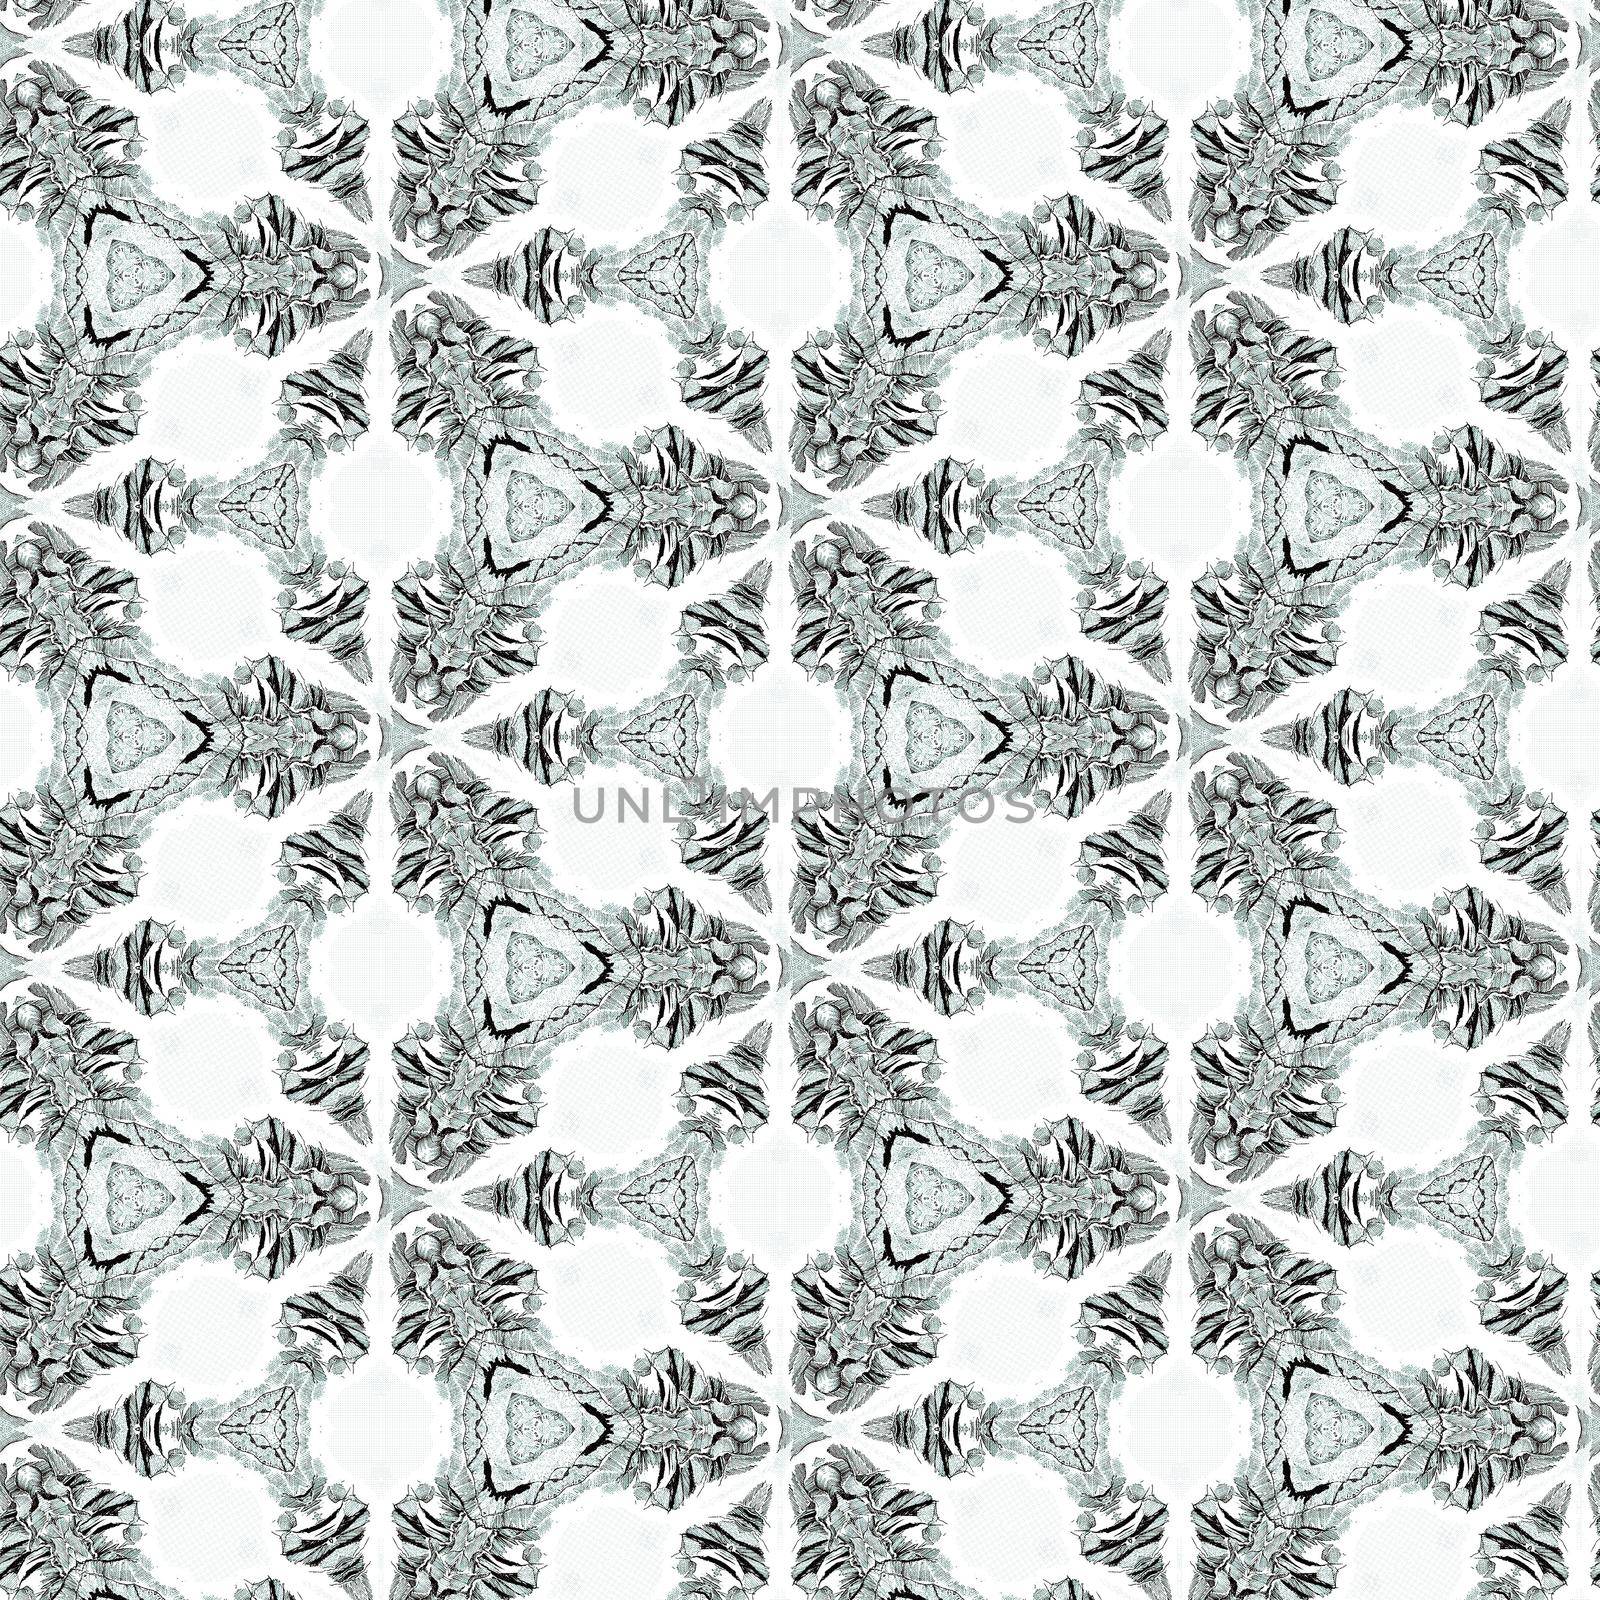 Monochromatic patterns and designs on solid sheet of wallpaper. Concept of home decor and interior designing by tabishere